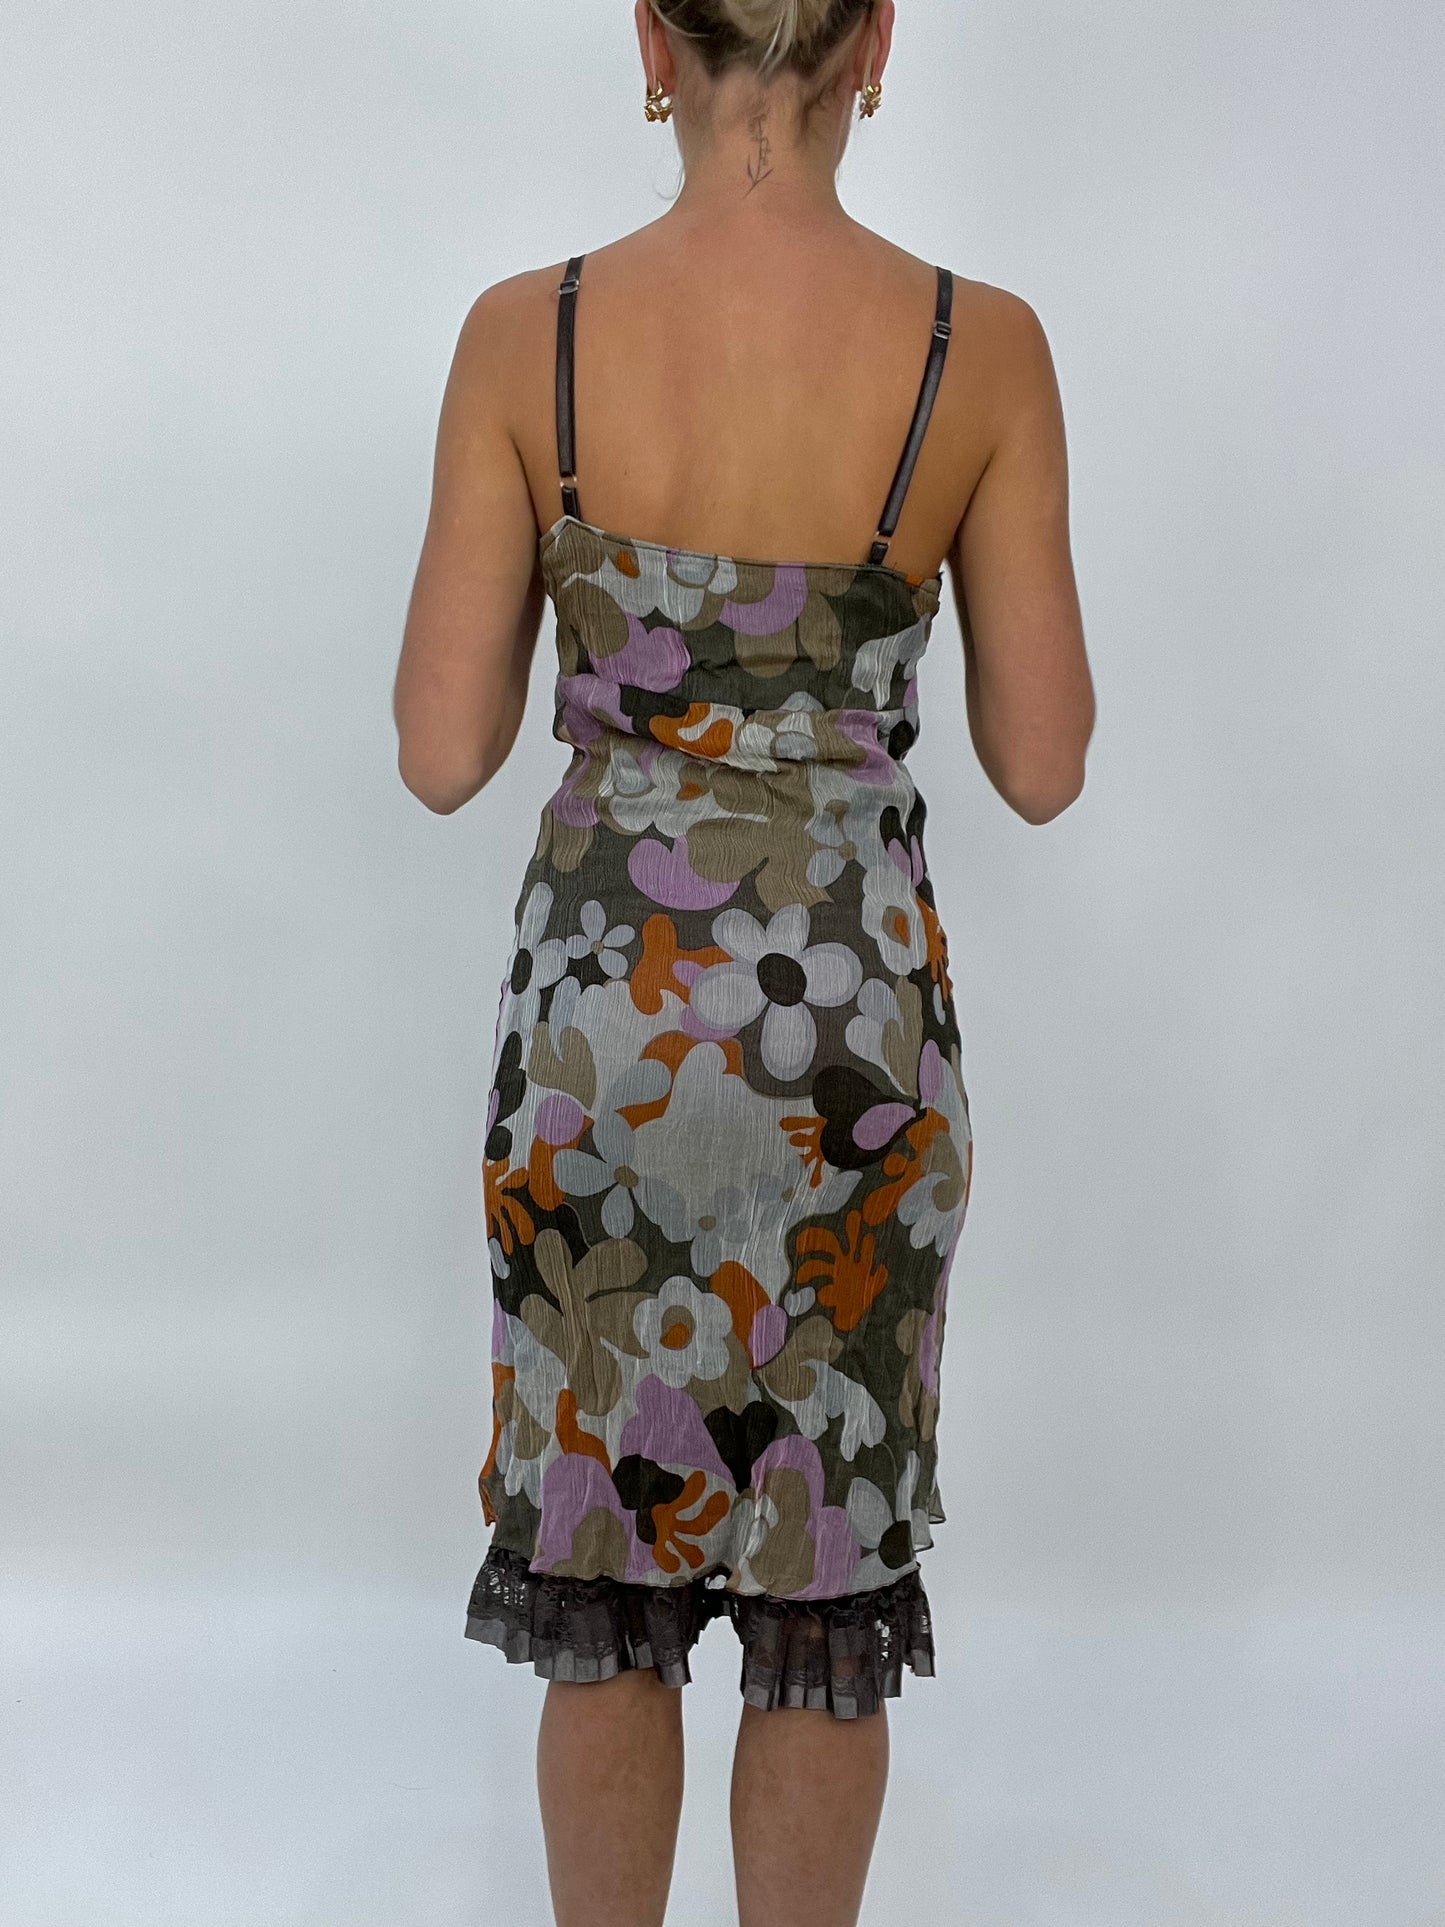 COCONUT GIRL DROP | small brown sheer maxi dress with orange and pink floral detail